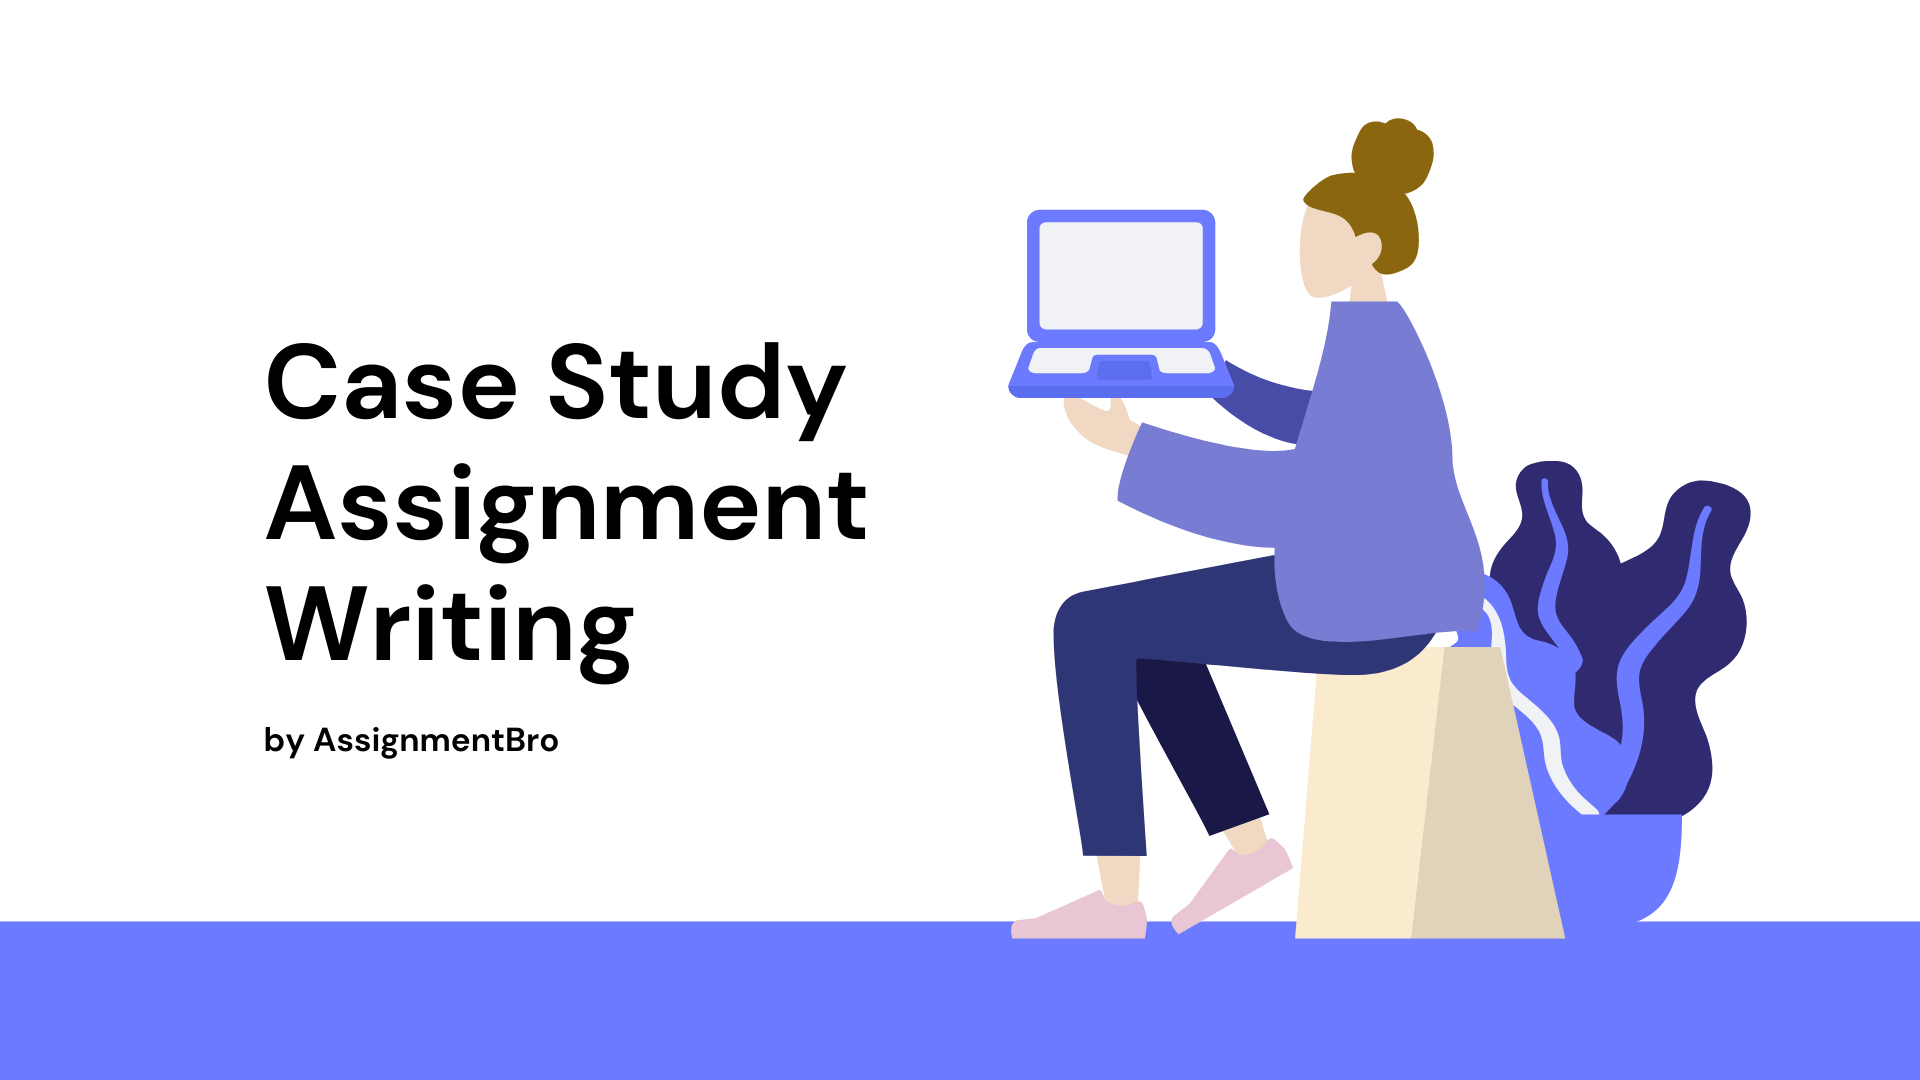 Case-Study Assignment Writing